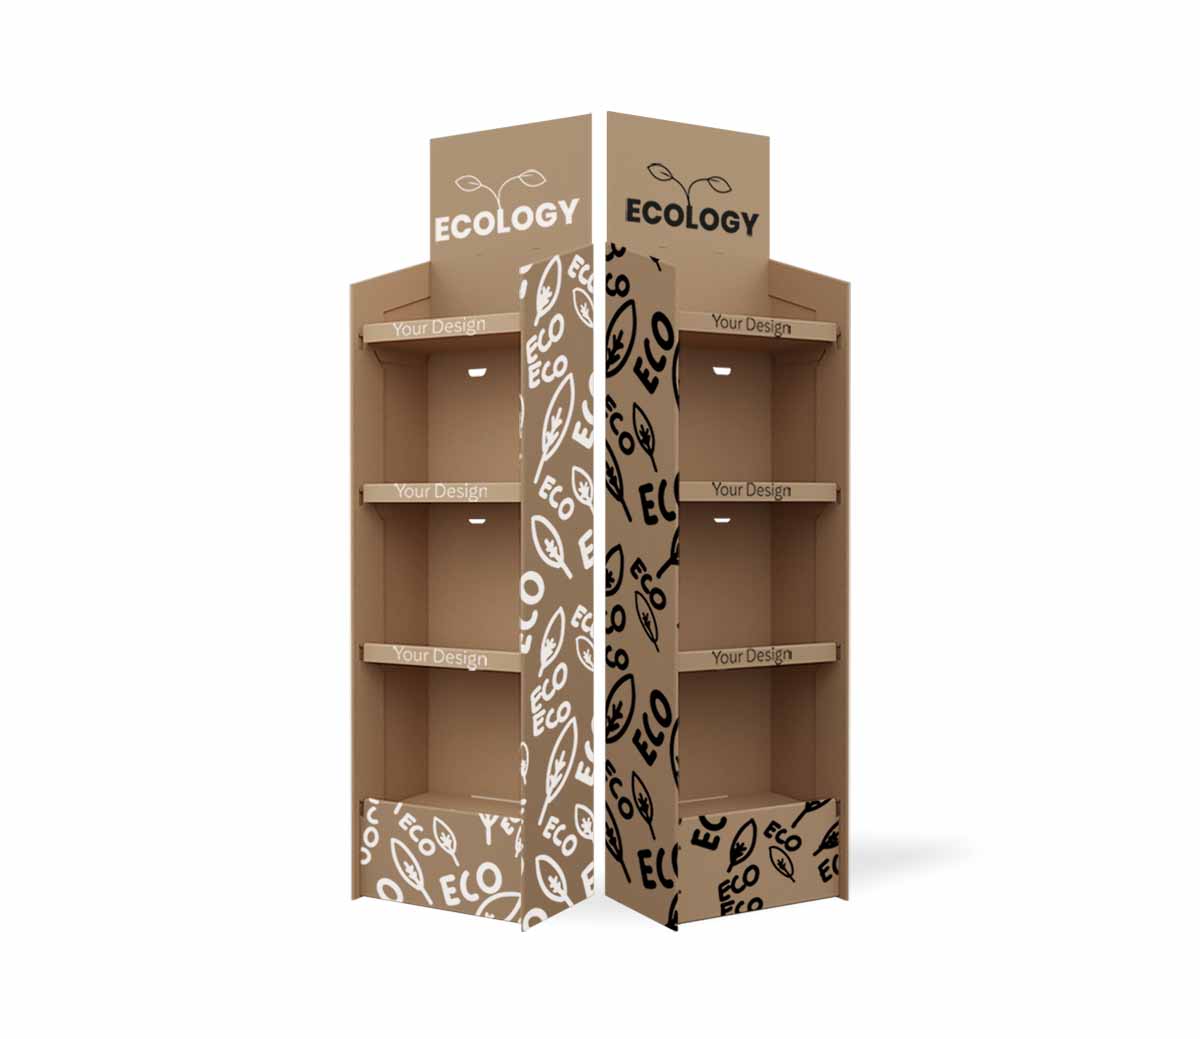 Stand Topper Eco 1A - Cardboard display stand eco 41 x 28,50 x 131 cm